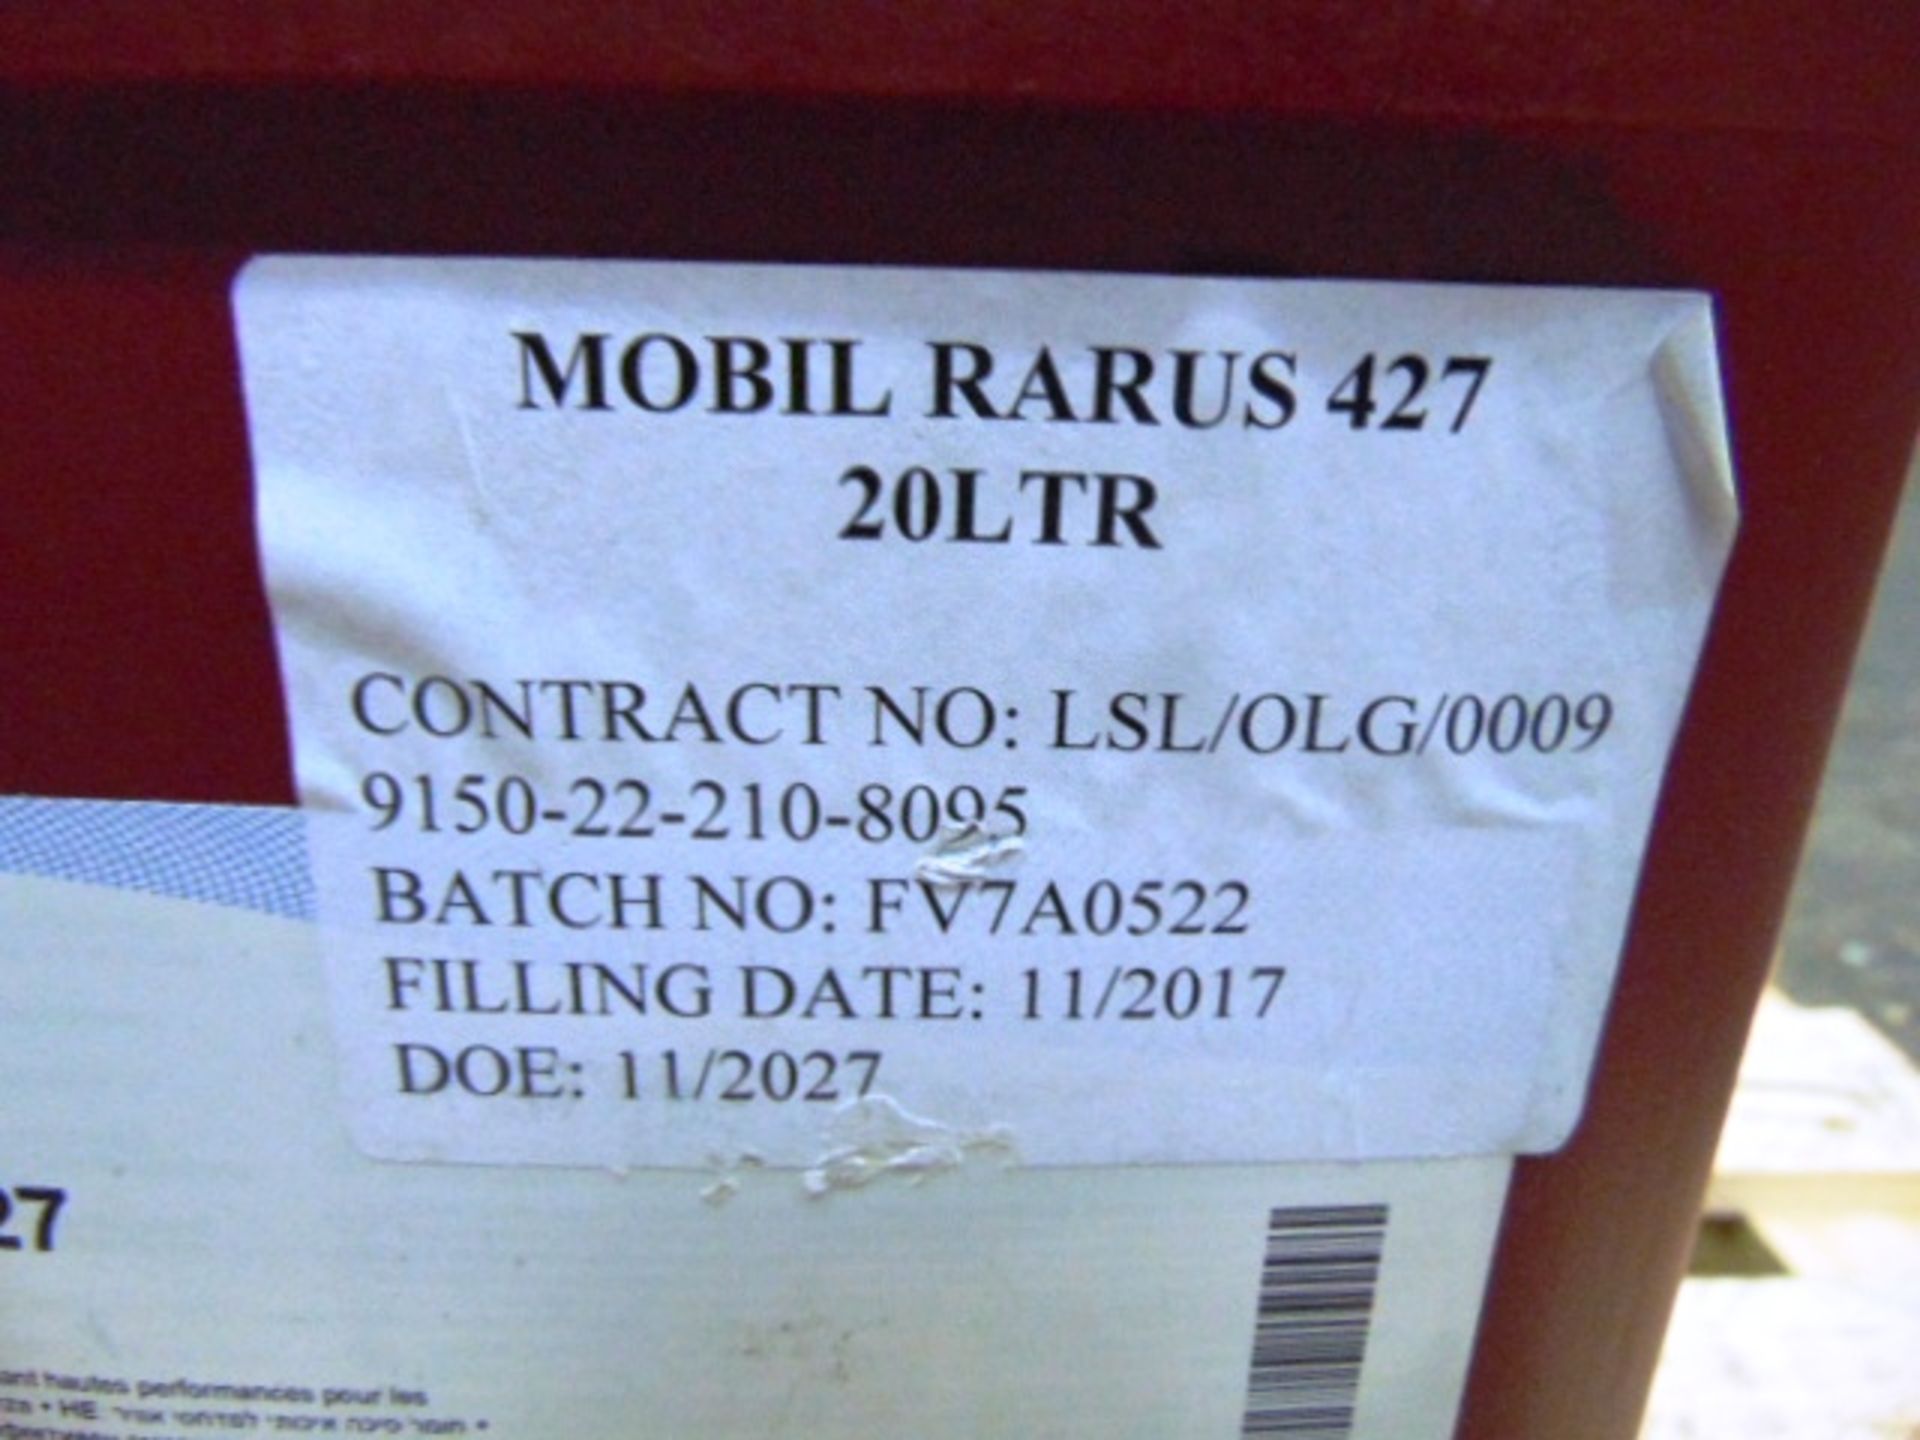 7 x Unissued 20L Drums of Mobil Rarus 427 Air Compressor Lubricant / Oil - Image 5 of 5